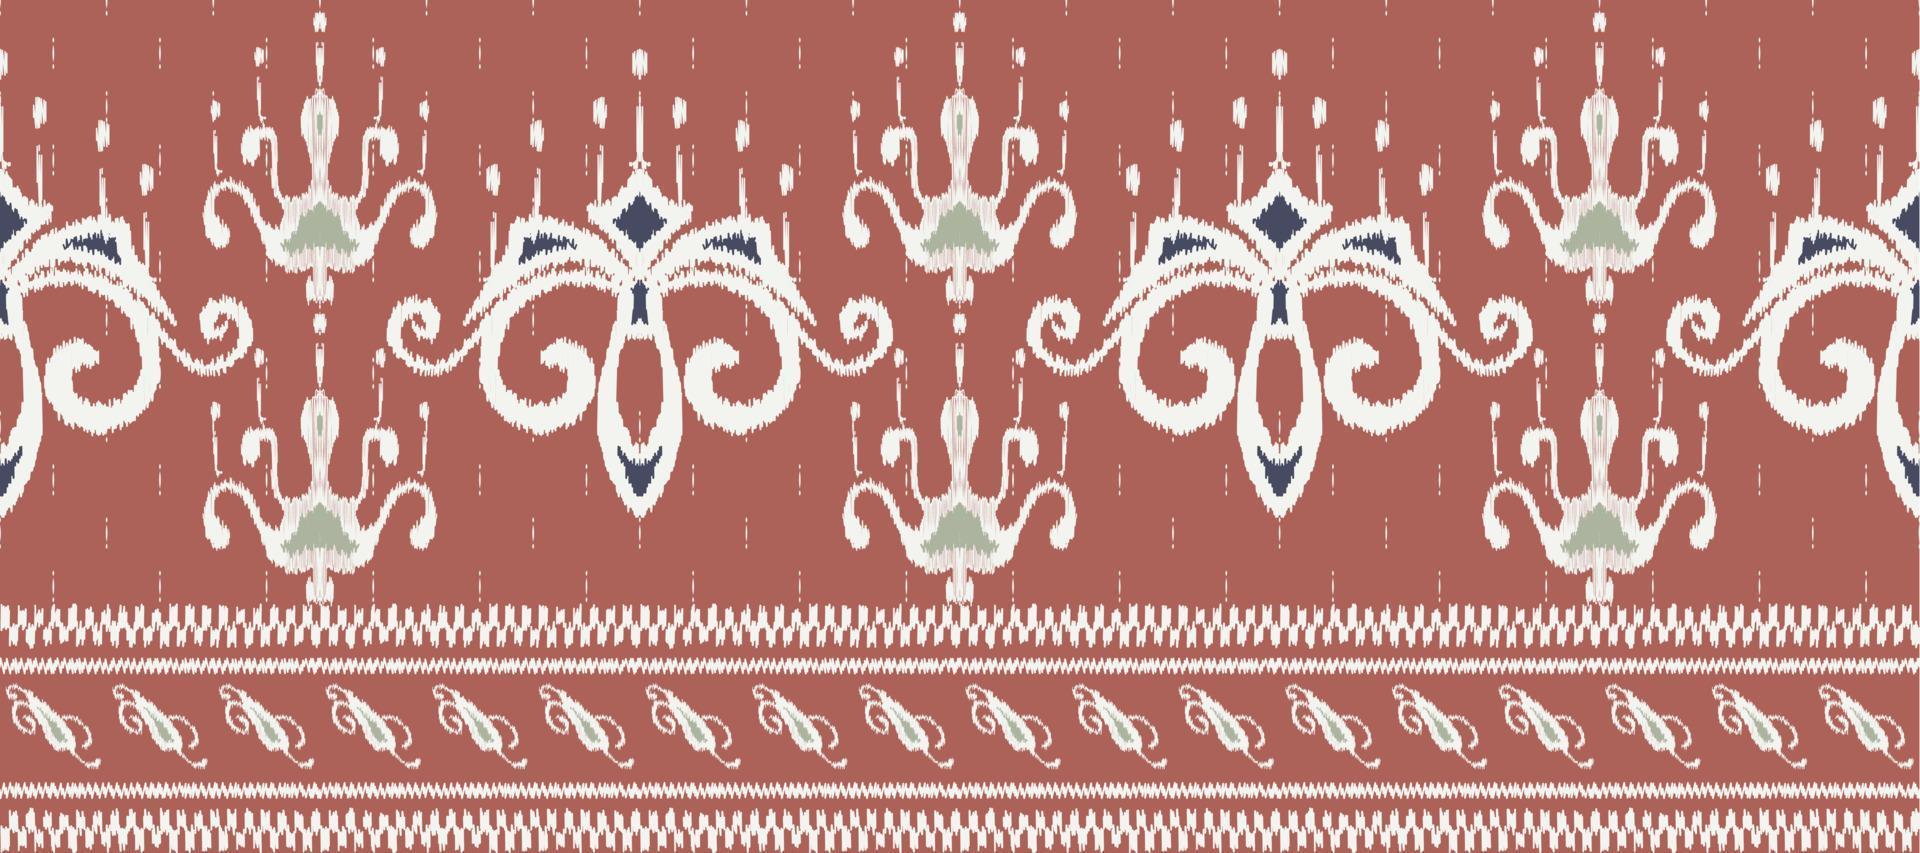 African Ikat damask paisley embroidery background. geometric ethnic oriental pattern traditional. Ikat Aztec style abstract vector illustration. design for print texture,fabric,saree,sari,carpet.